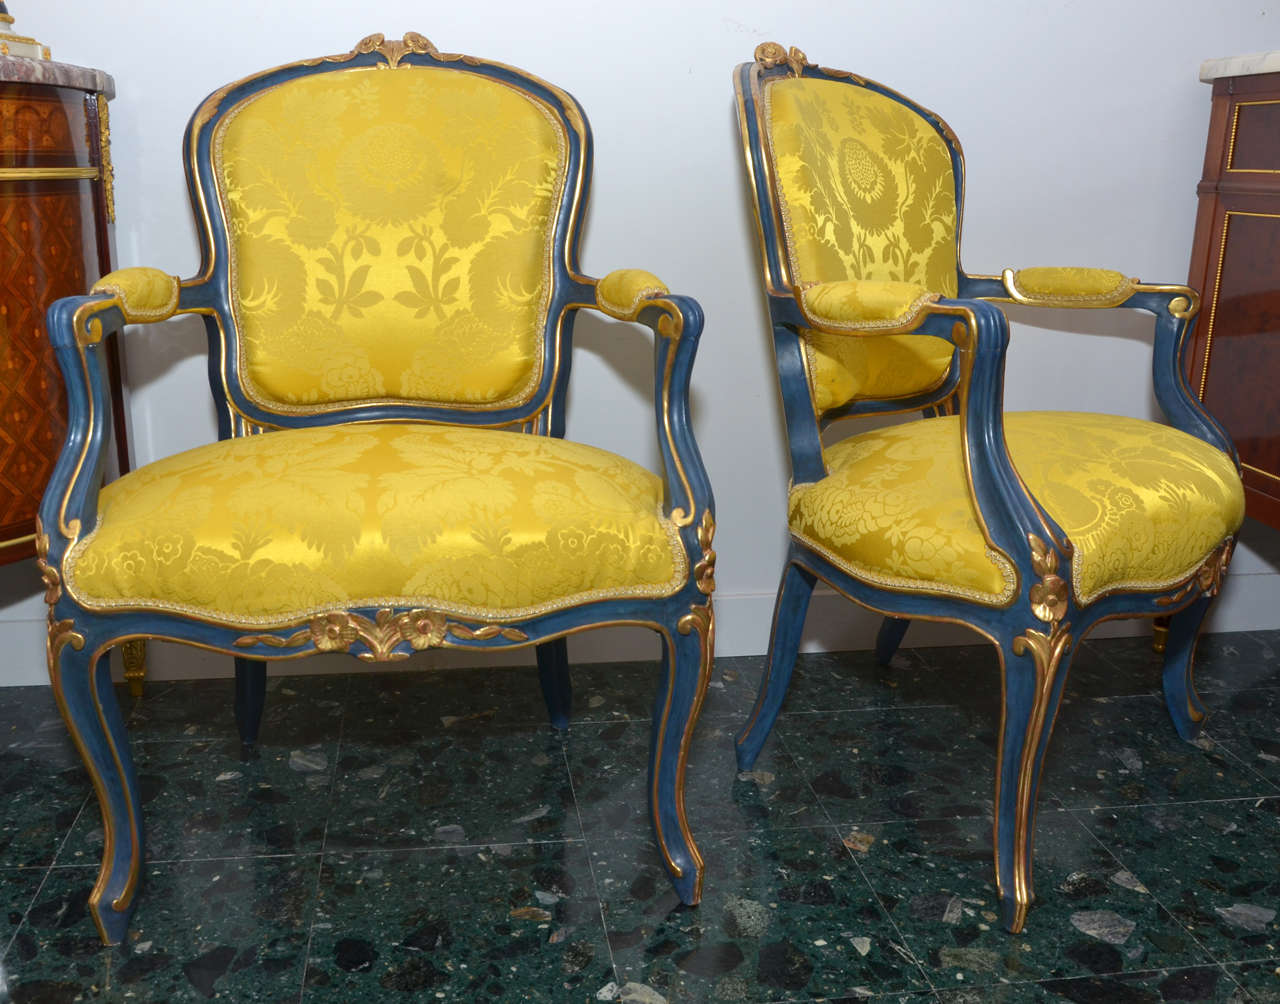 Pair of painted and gilded wood Venitian armchairs.